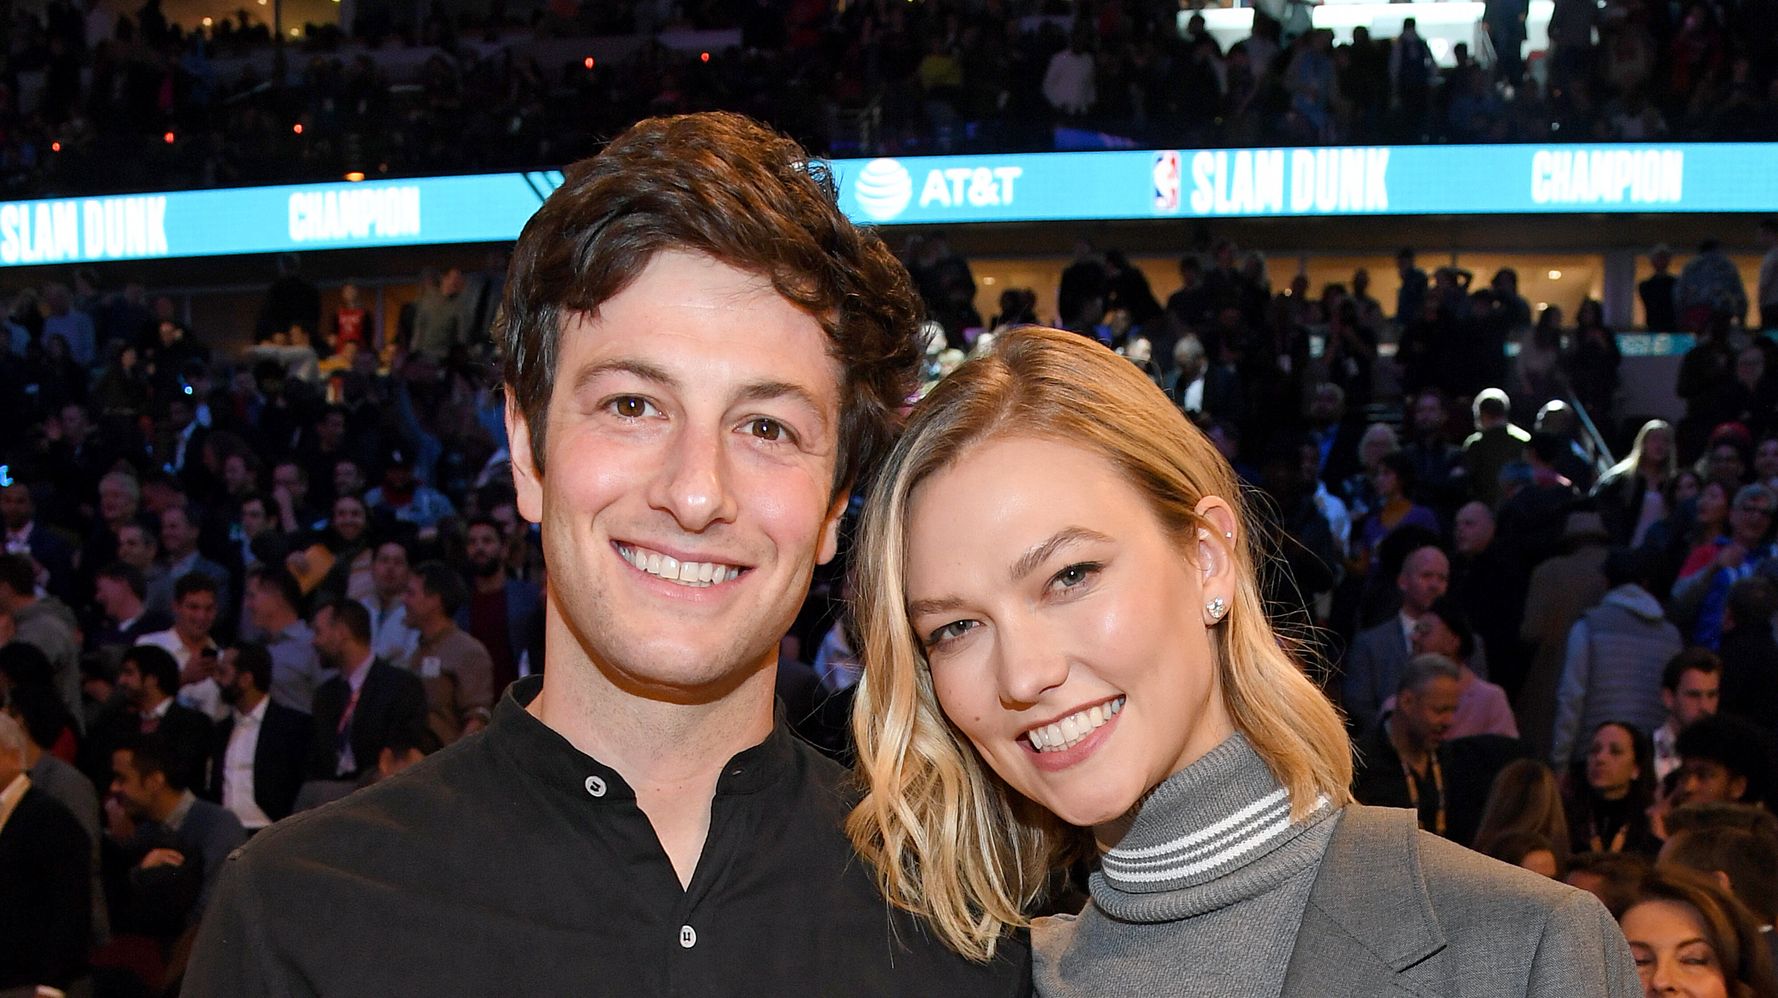 Karlie Kloss and Joshua Kushner welcome their first child